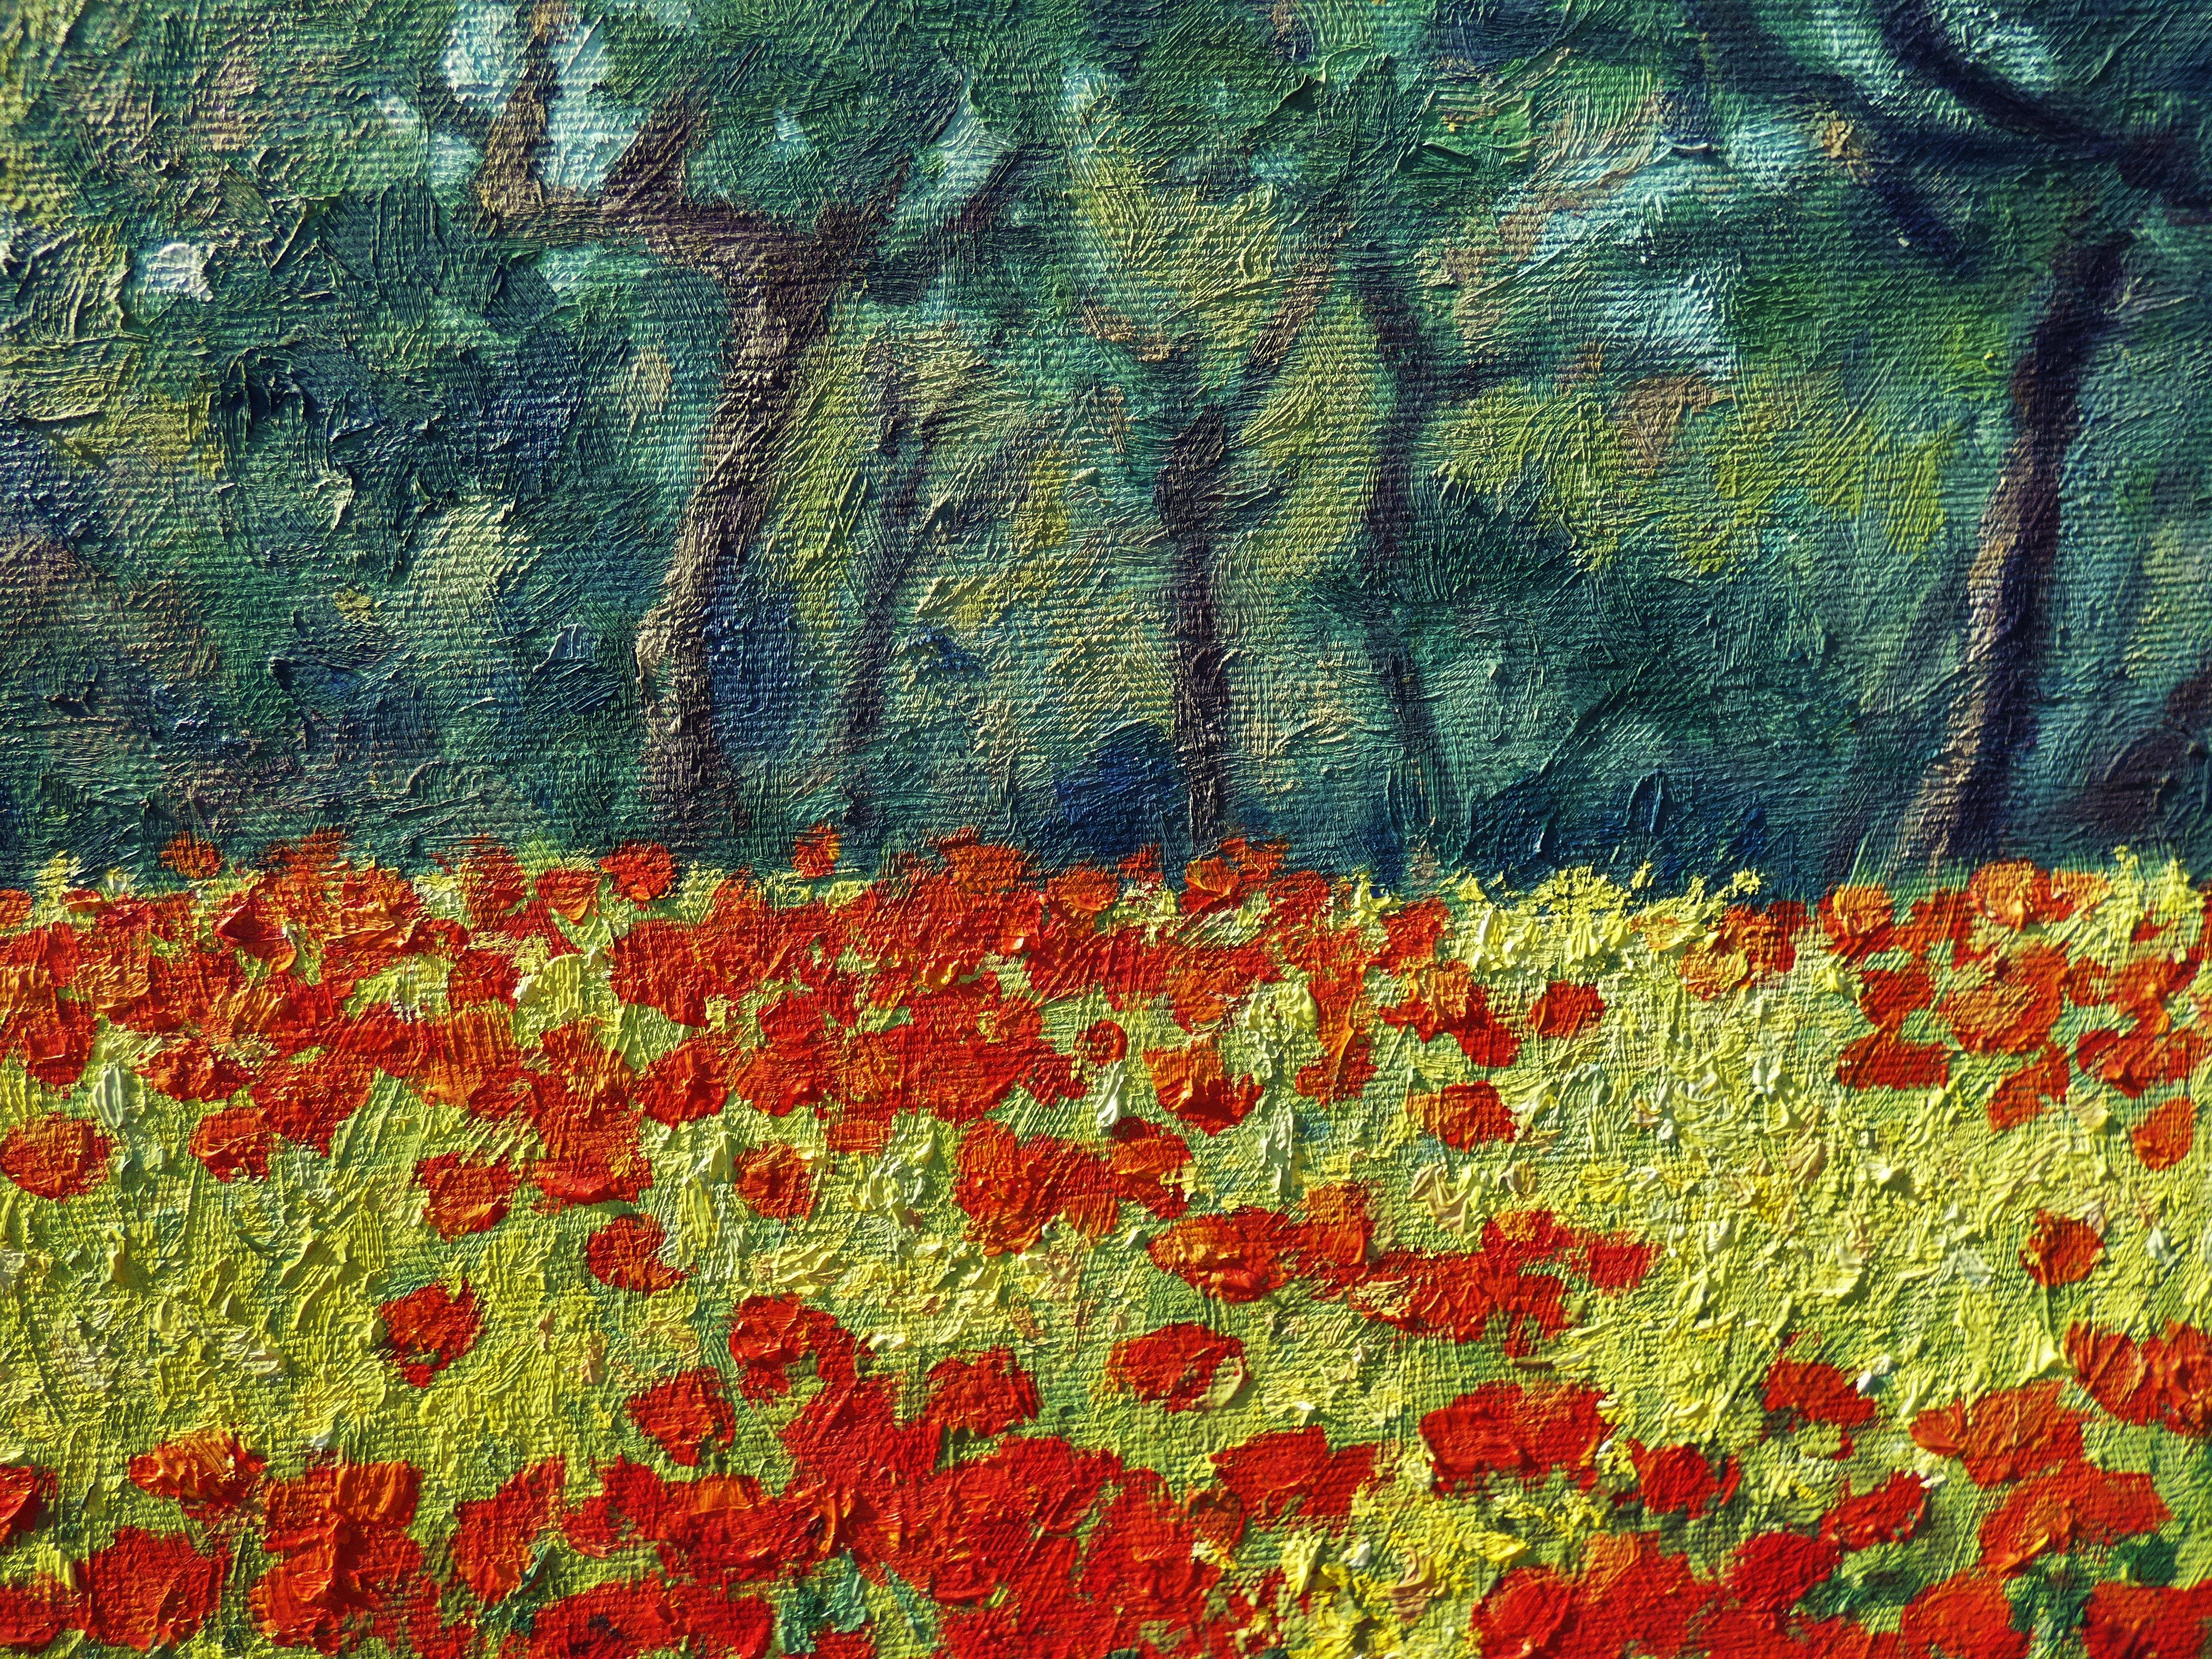 My painting is about spring, spring is about flowers, strong colors and joy. It's like traveling in a dream and waking up suspended in the light :: Painting :: Impressionist :: This piece comes with an official certificate of authenticity signed by